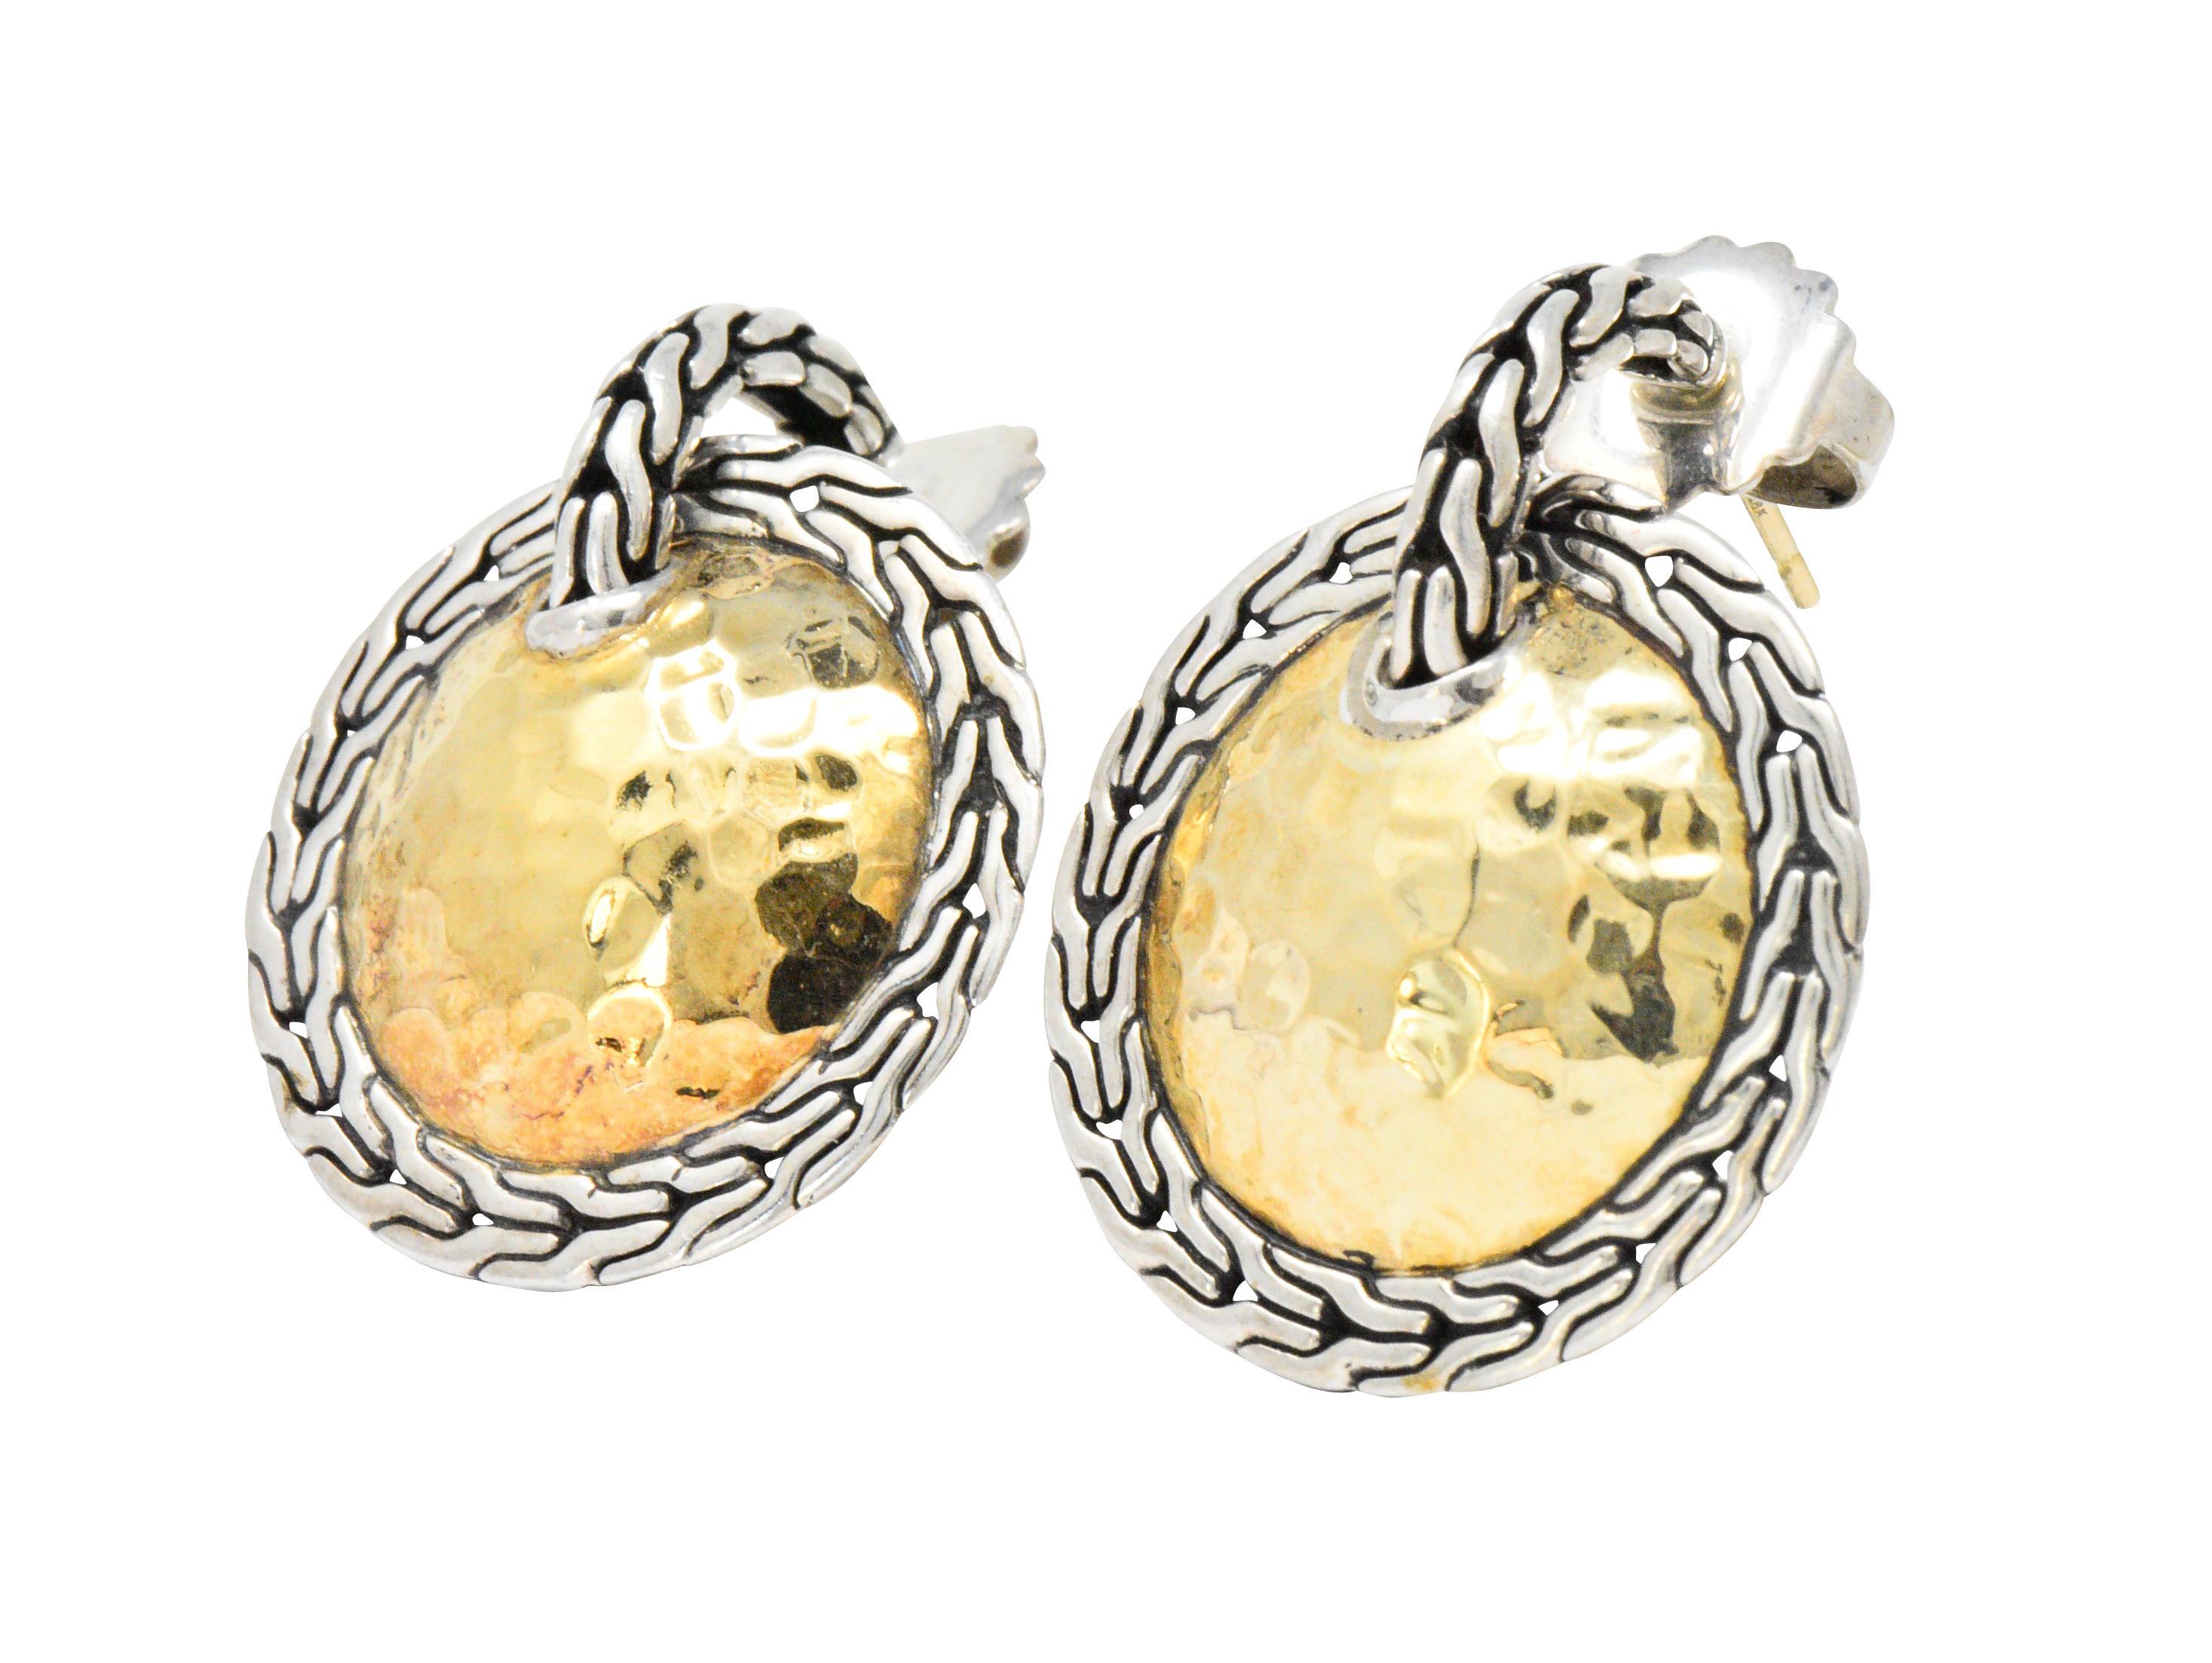 Earrings are designed as a half hoop surmount comprised of a sterling silver classic chain motif

Suspending a large round disk centering a hammered gold dome with a sterling silver classic chain surround

Completed by posts and friction backs

With